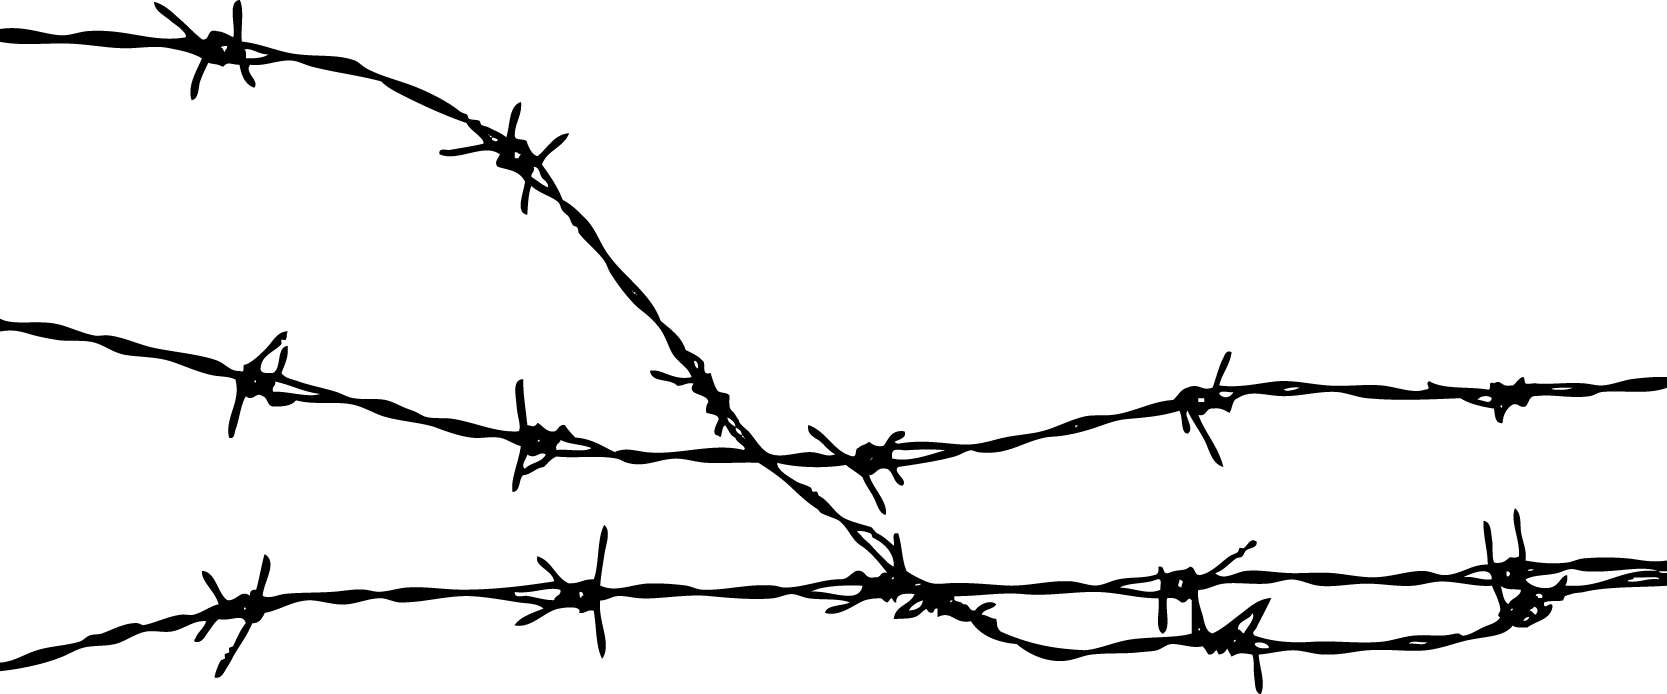 Barbwire - Clipart library